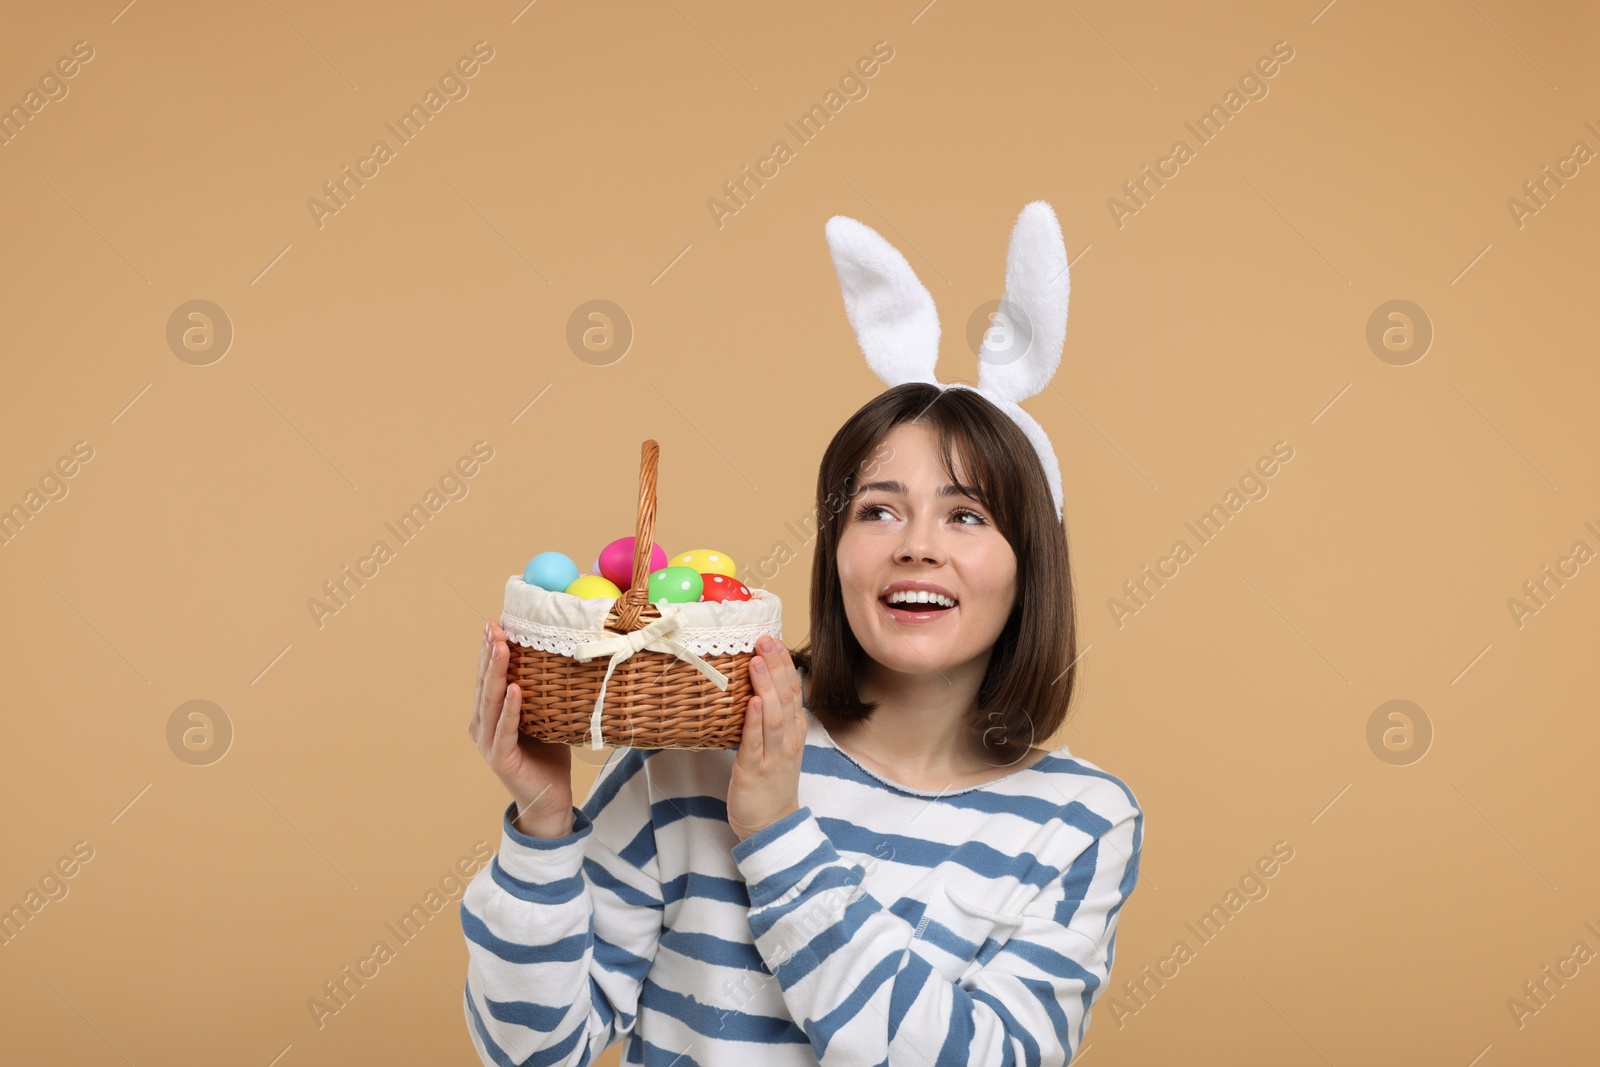 Photo of Easter celebration. Happy woman with bunny ears and wicker basket full of painted eggs on beige background